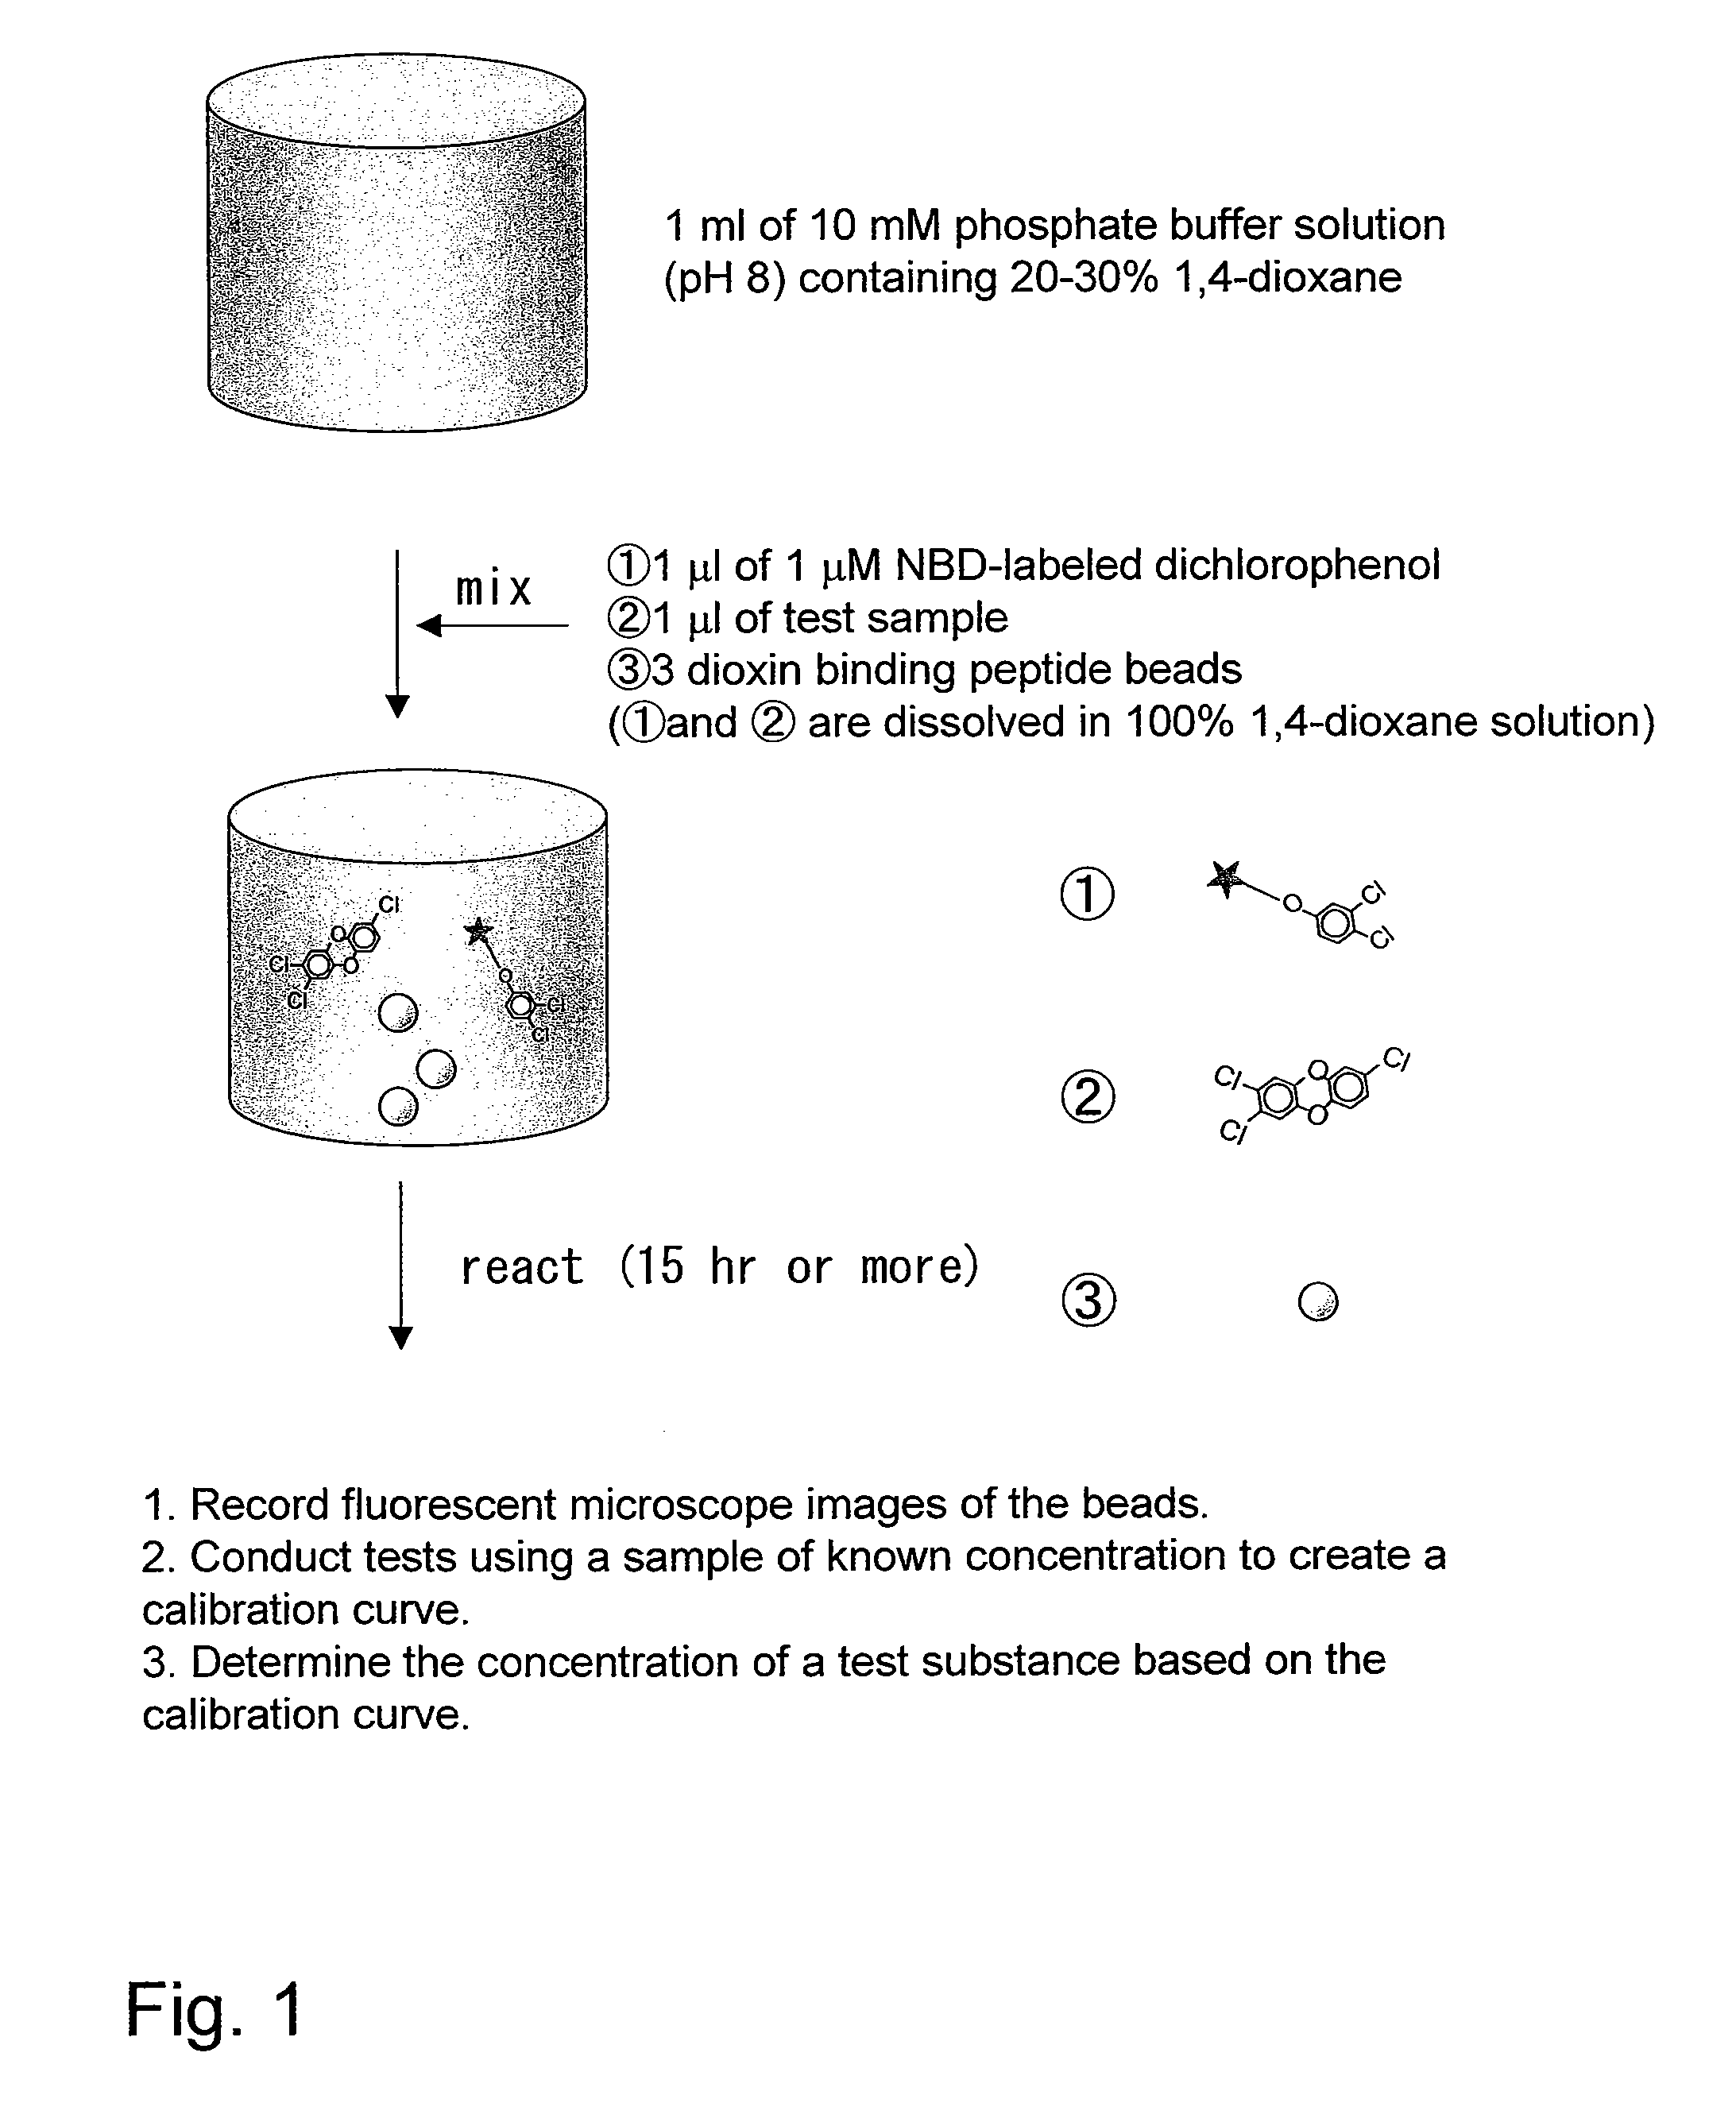 Dioxin-Binding Material and Method of Detecting or Quantifying Dioxin